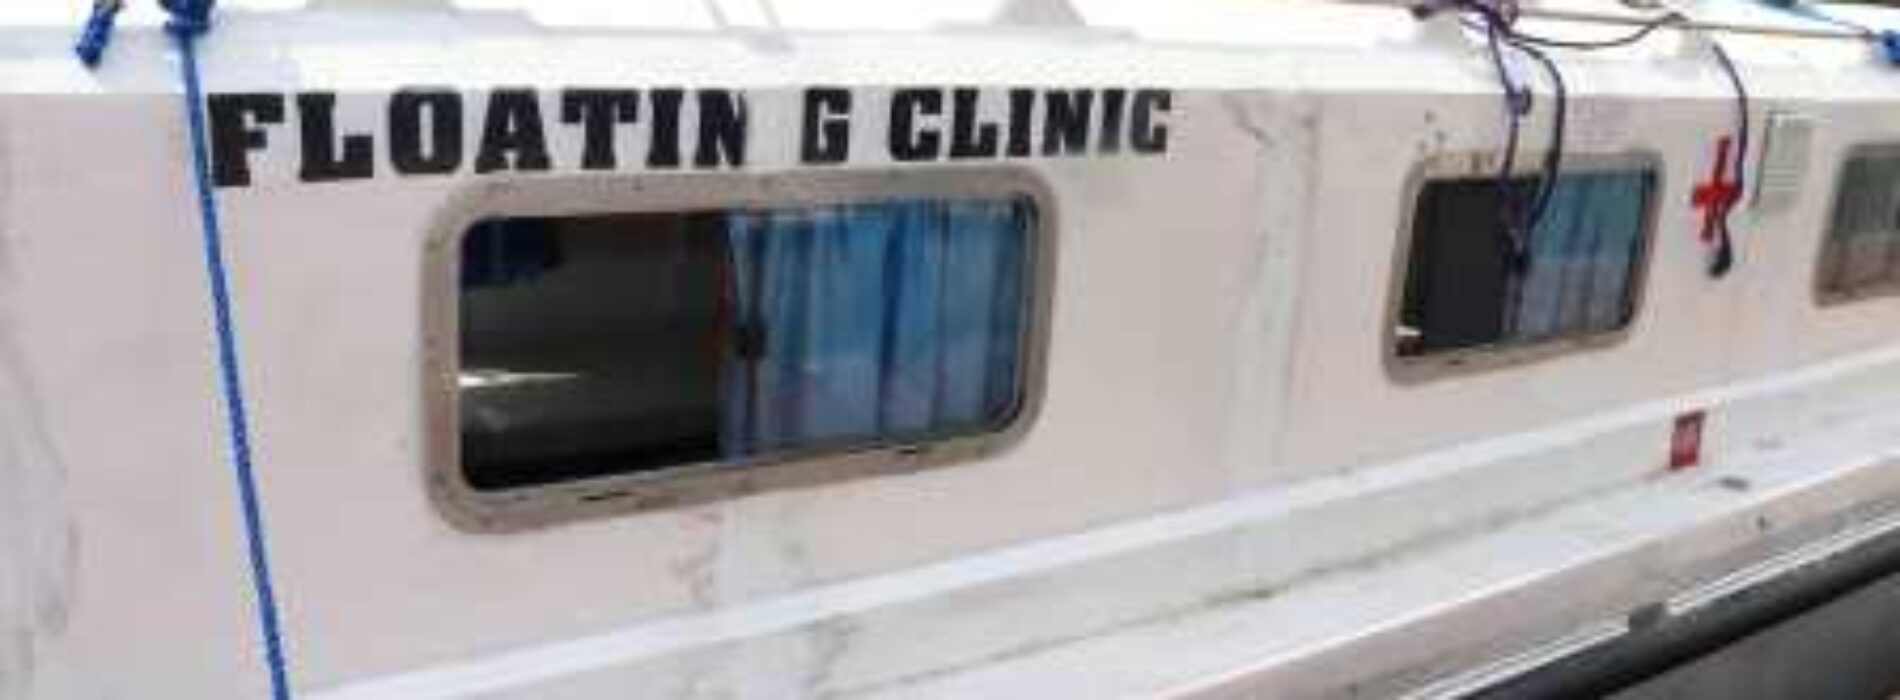 Lagos unveils state of  art floating clinic boat